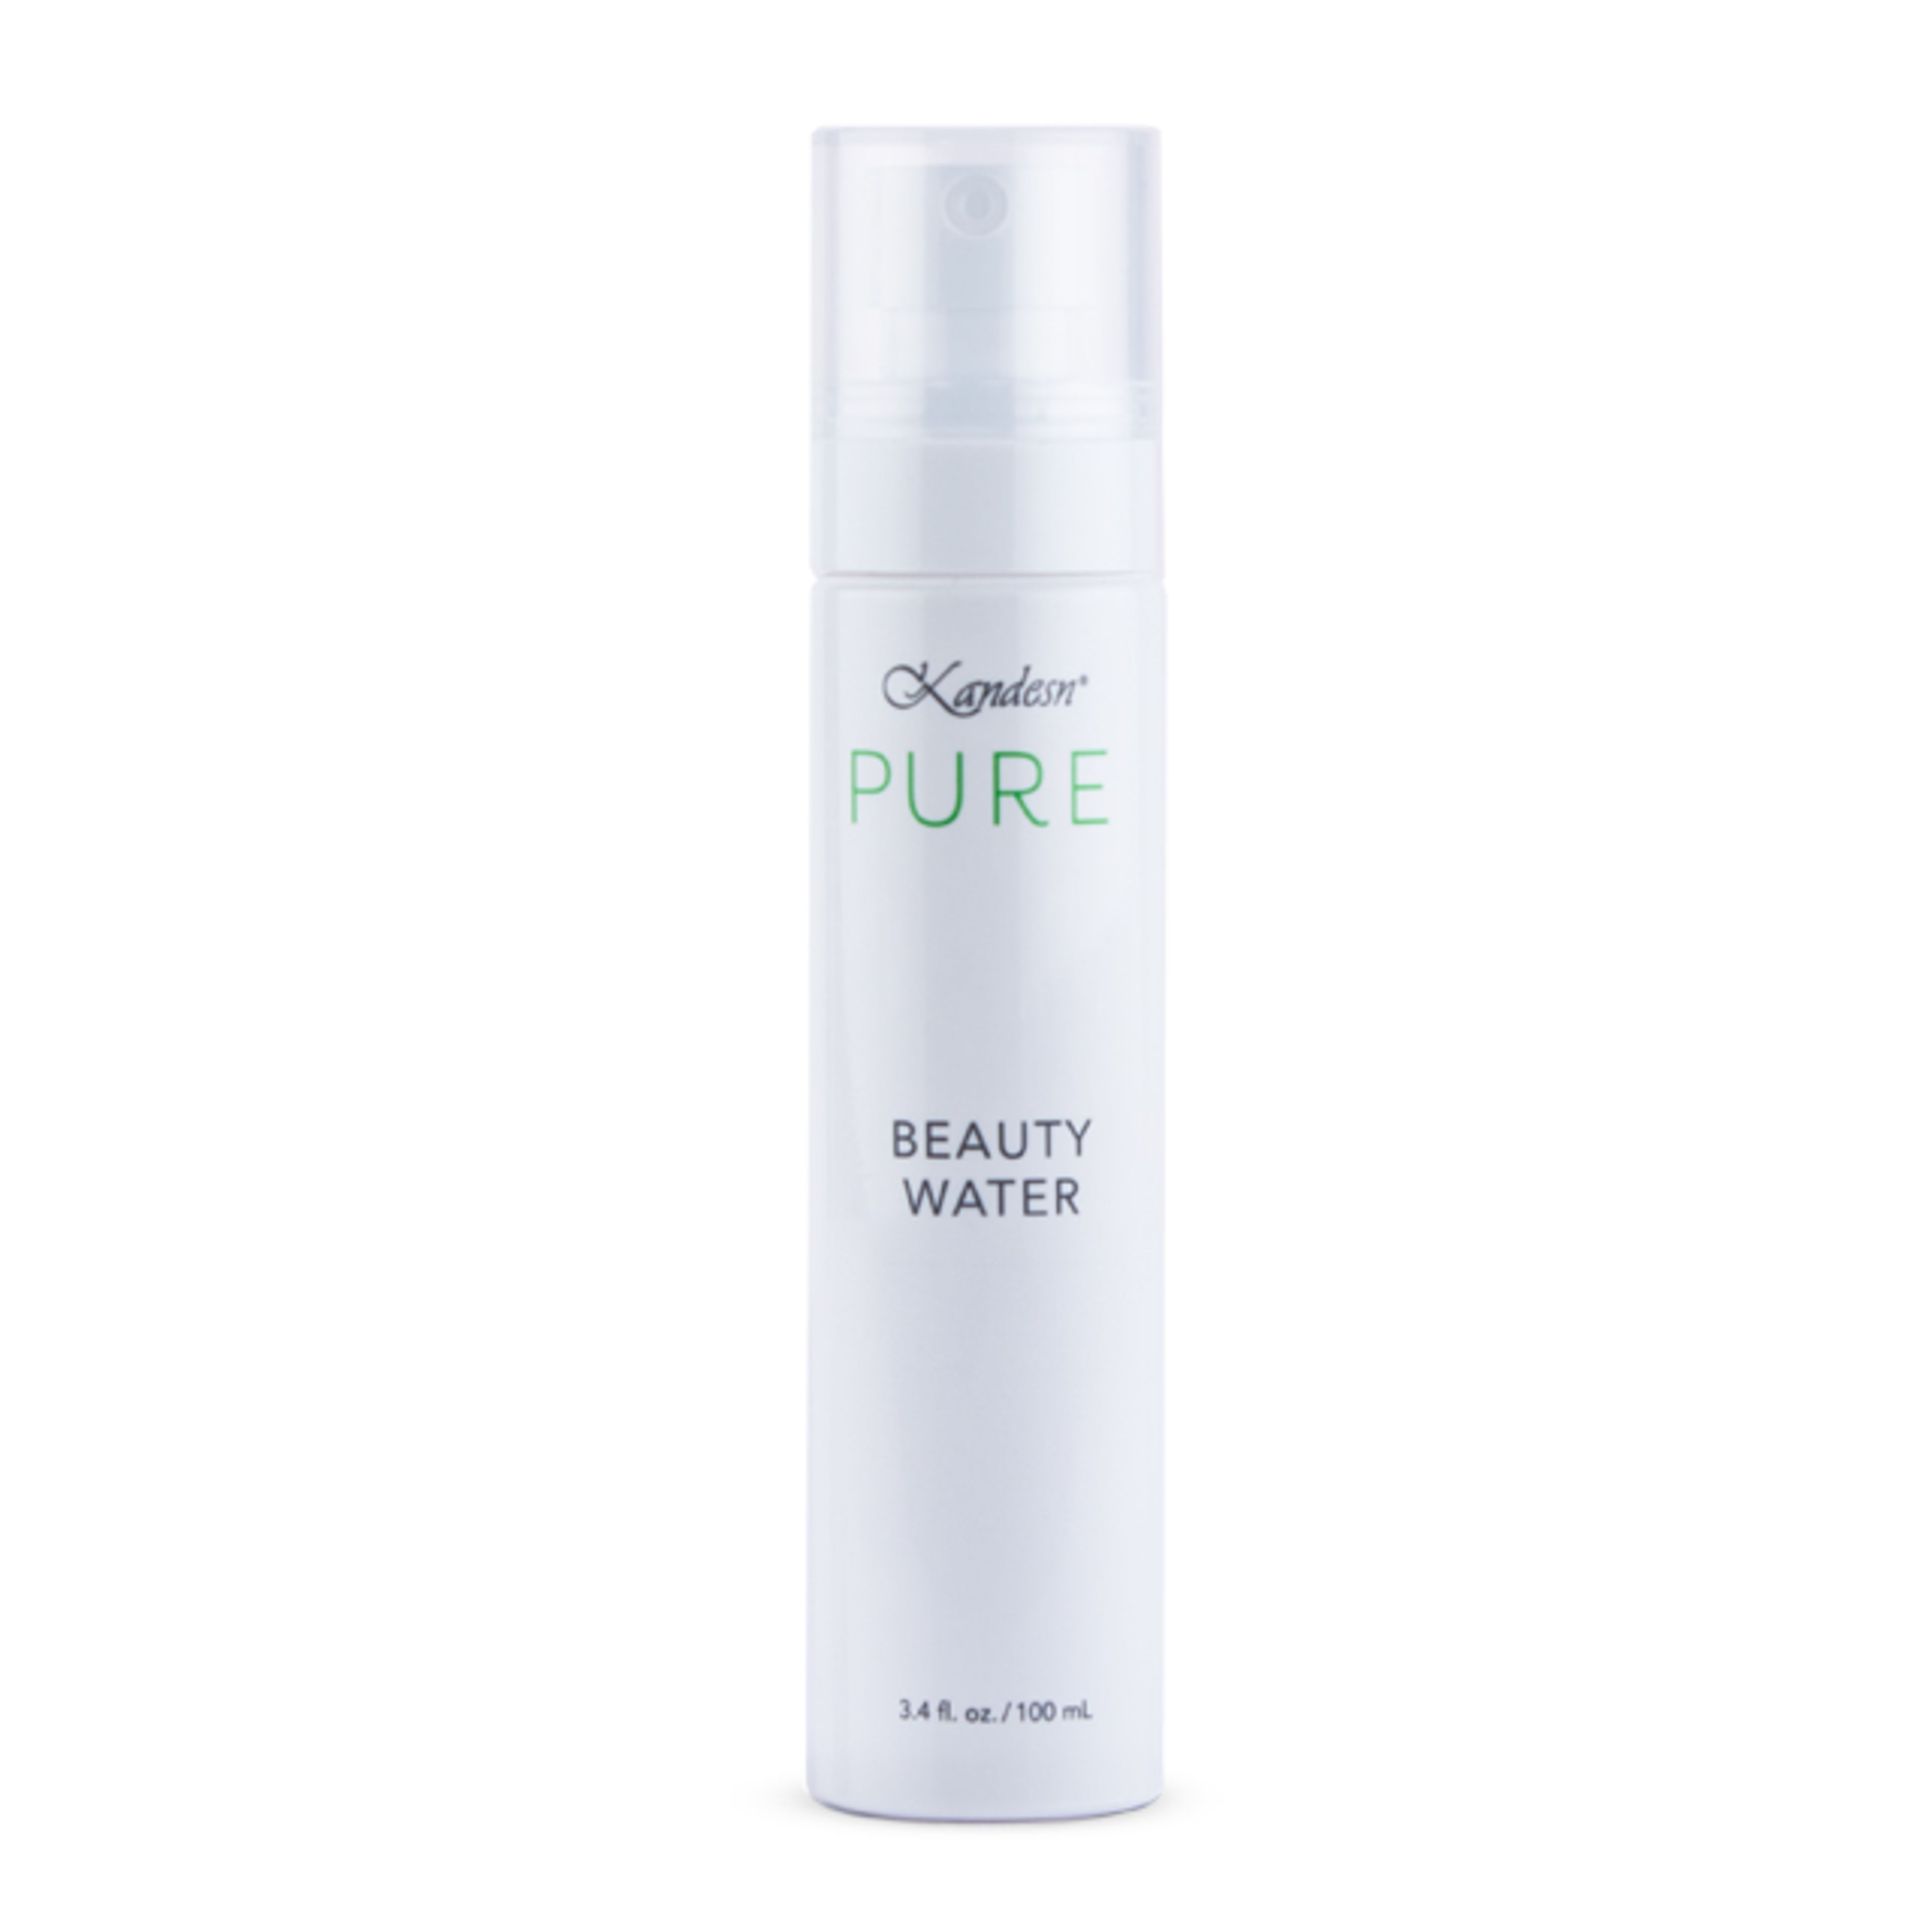 Kandesn® Pure Beauty Water 100 mL/3.4 oz.